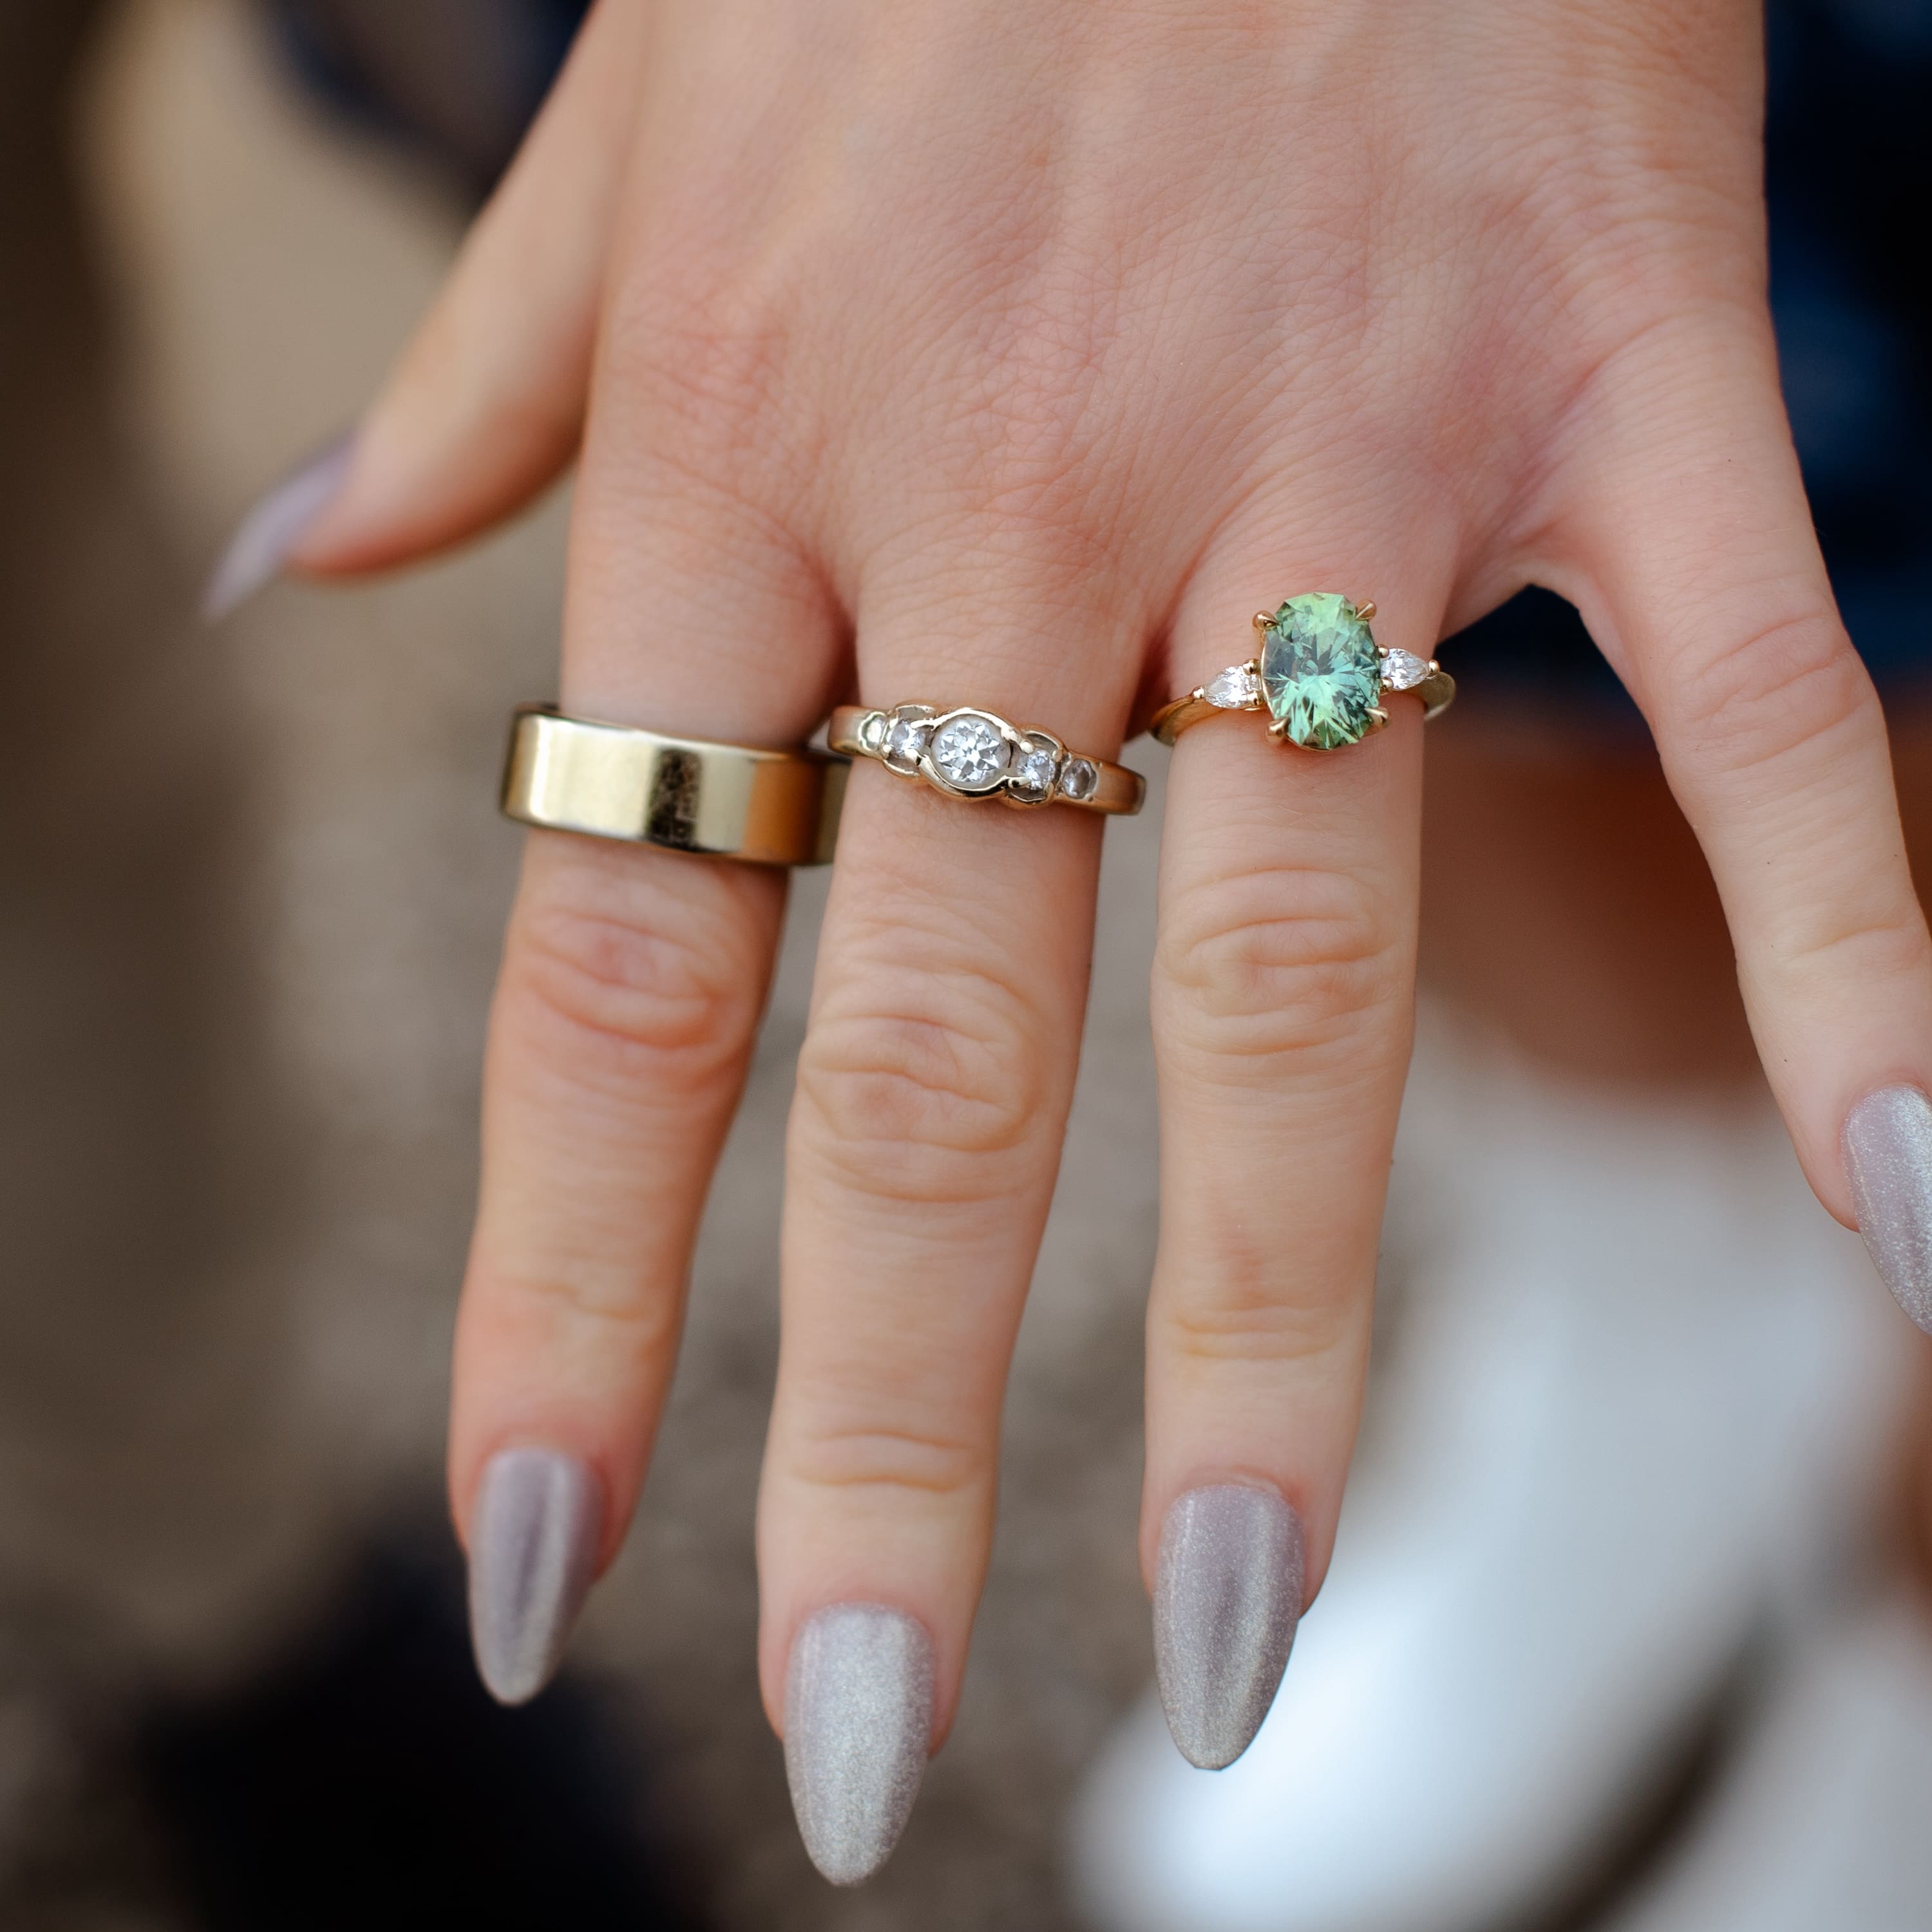 A photo from a customer review with two rings not made by Earth's treasury, then on the right: a custom three stone ring in 14k yellow gold with a 3.50-Carat Montana Sapphire